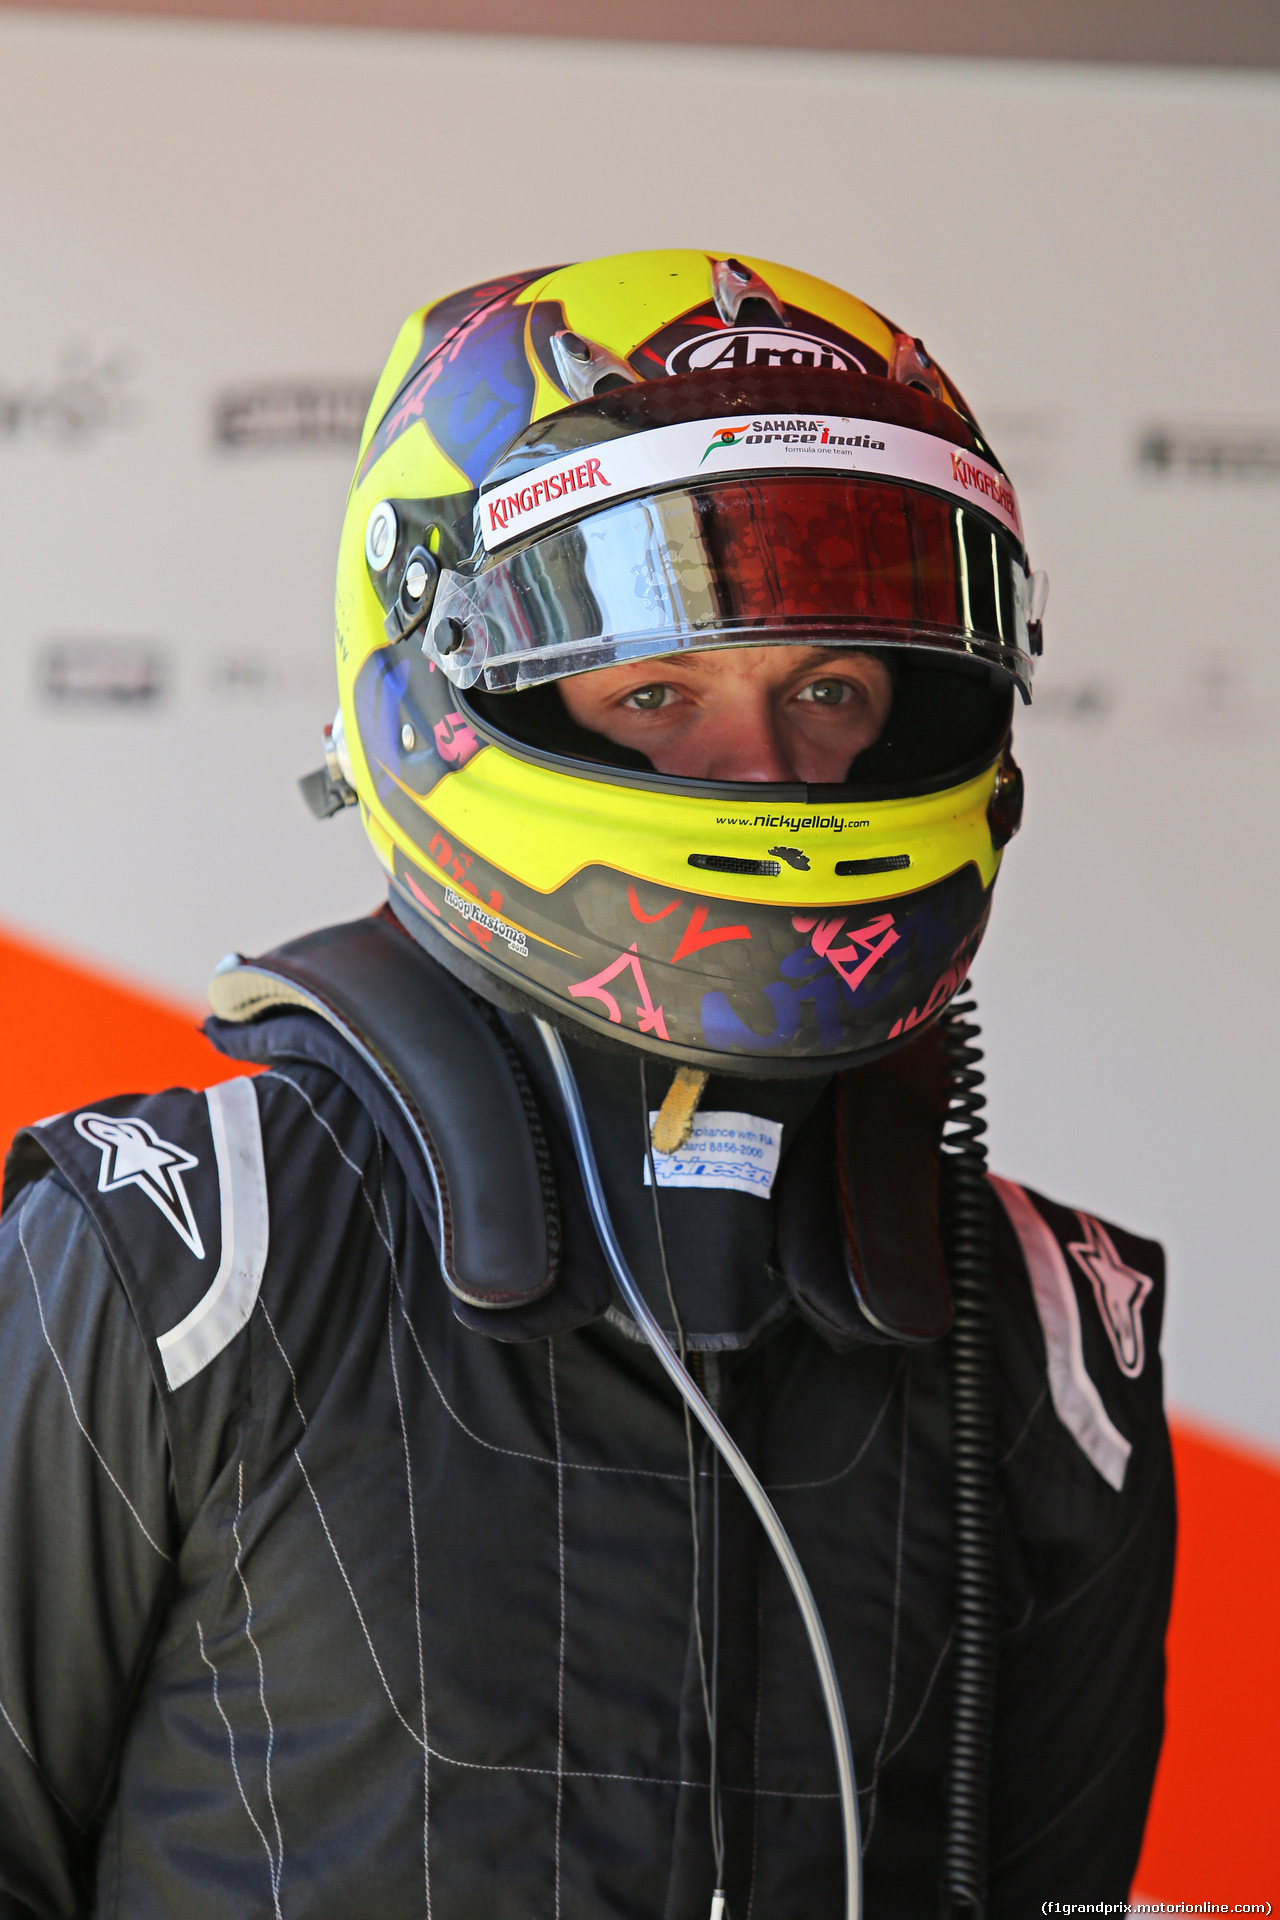 TEST F1 BARCELLONA 12 MAGGIO, Nick Yelloly (GBR) Sahara Force India F1 Test Driver.
12.05.2015.